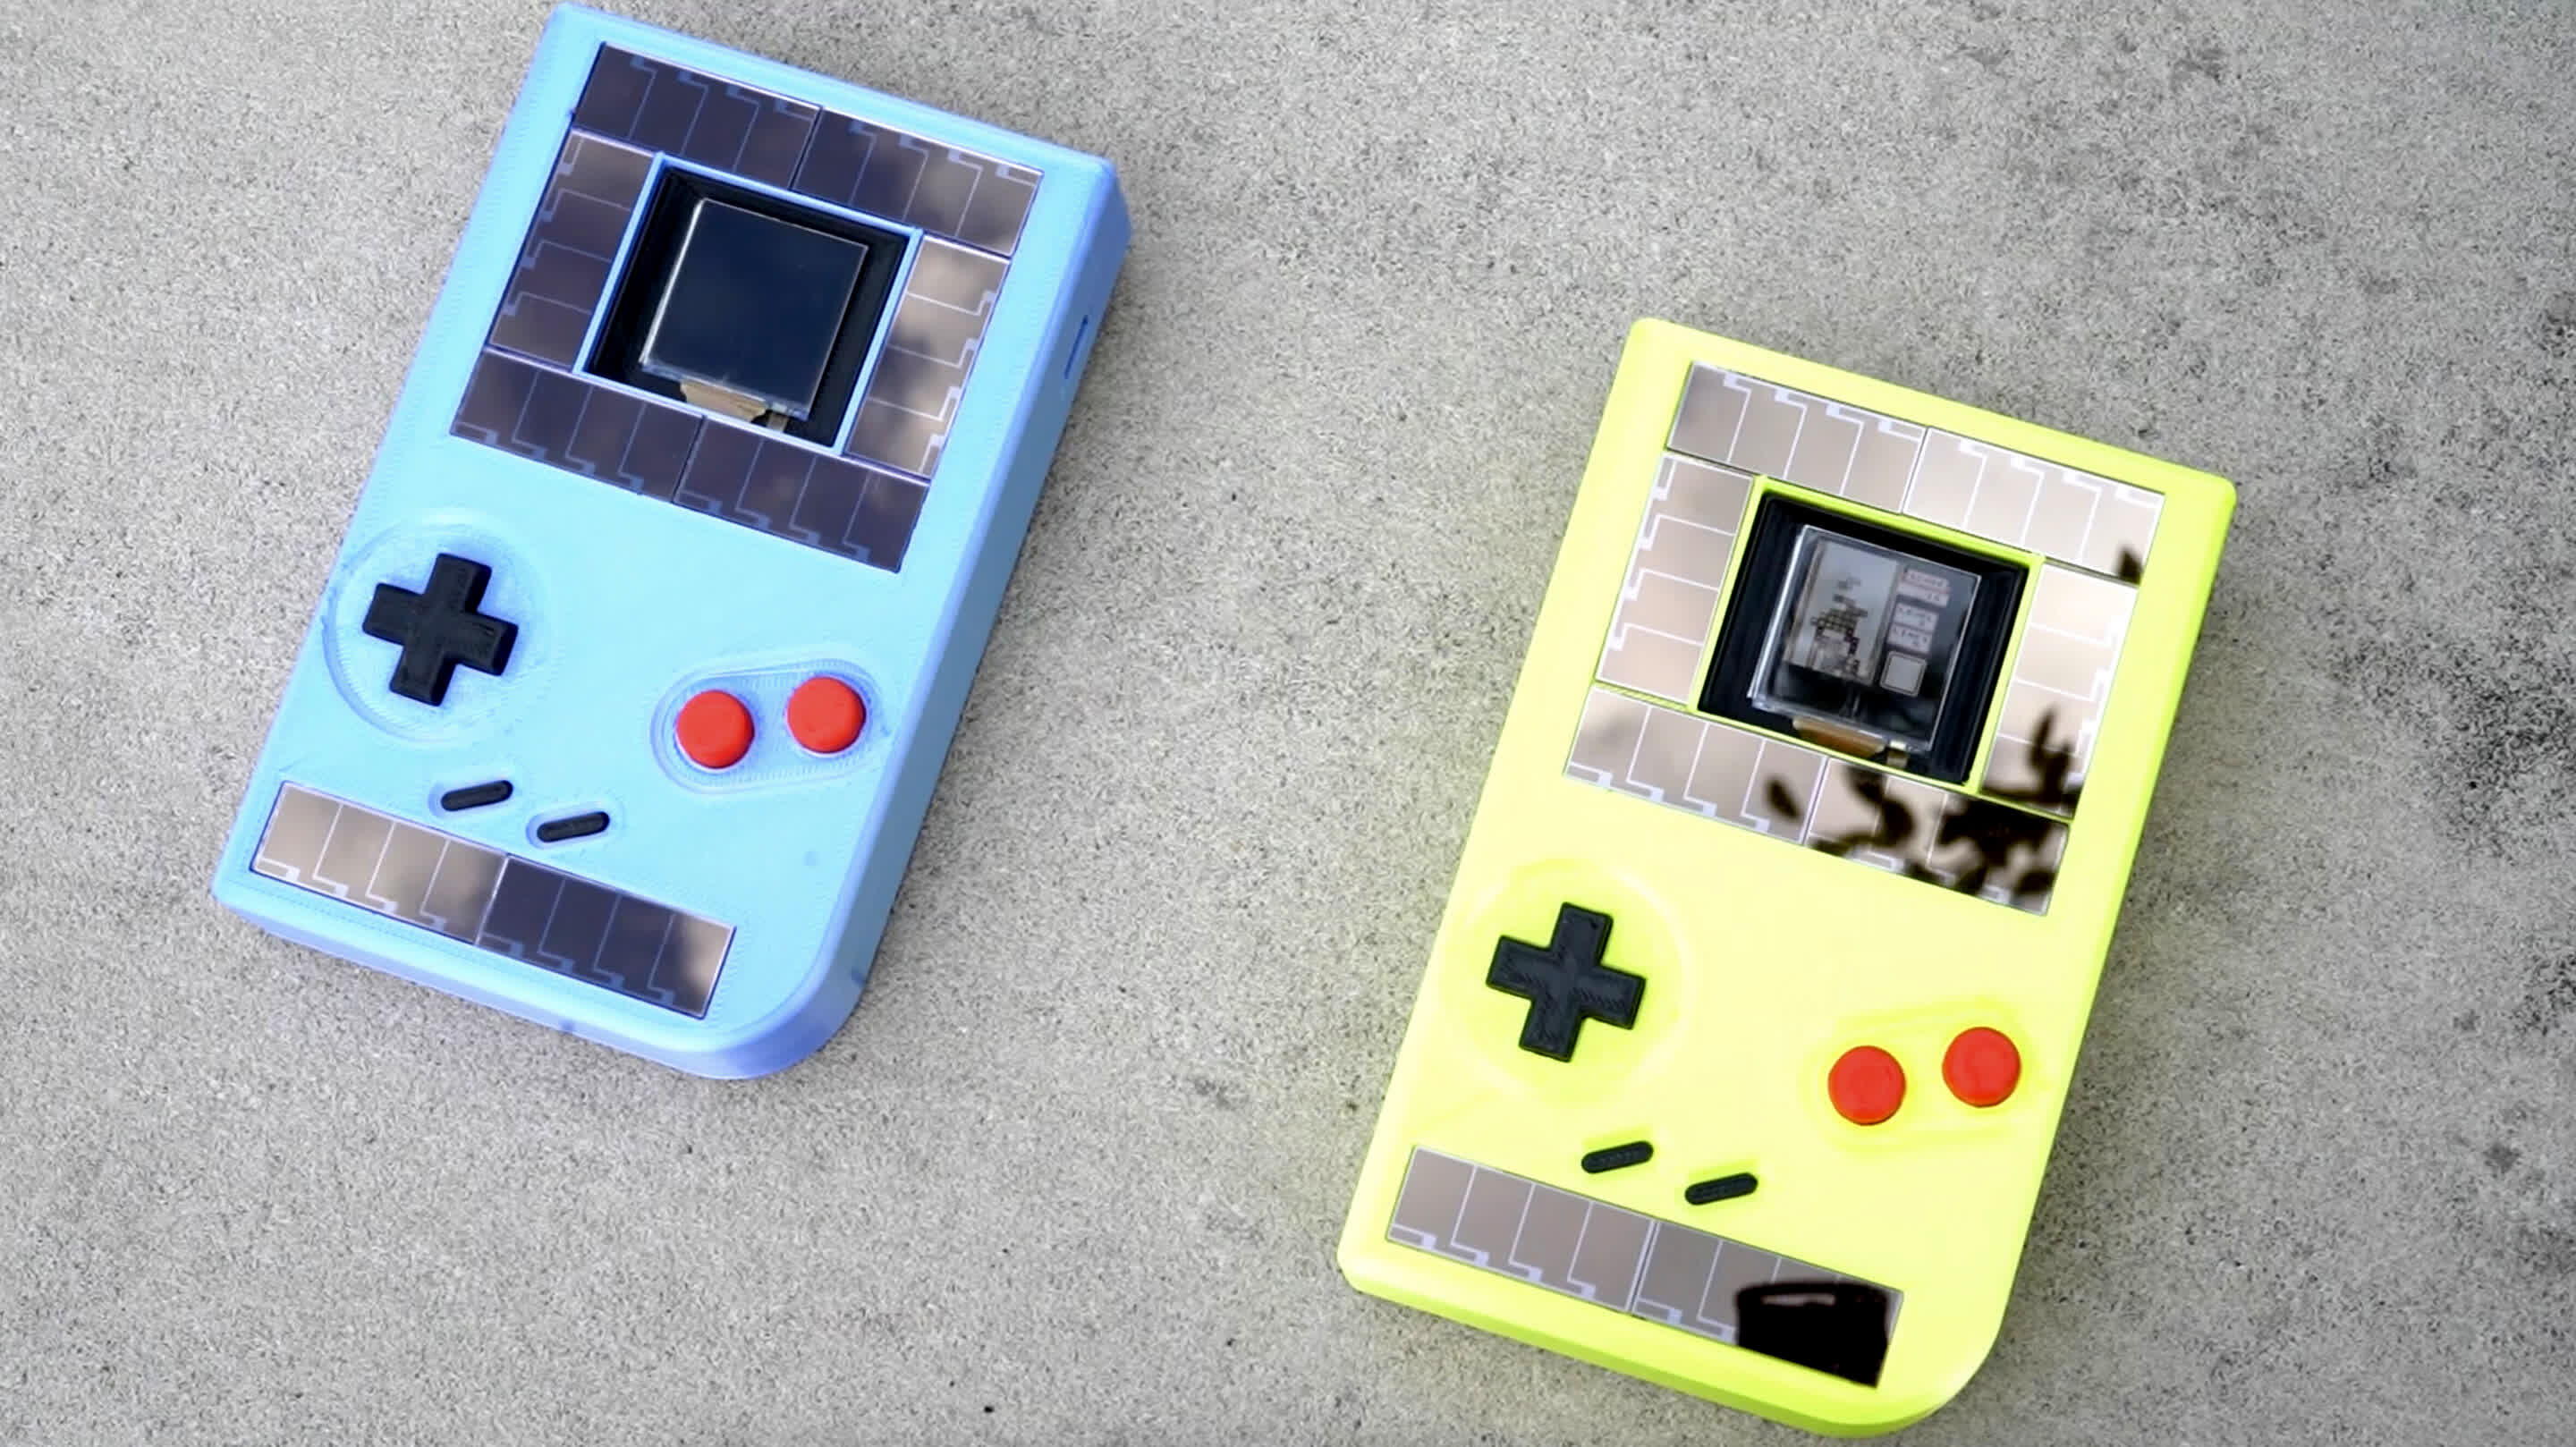 Solar-powered Game Boy can run indefinitely (but shuts down every 10 seconds)